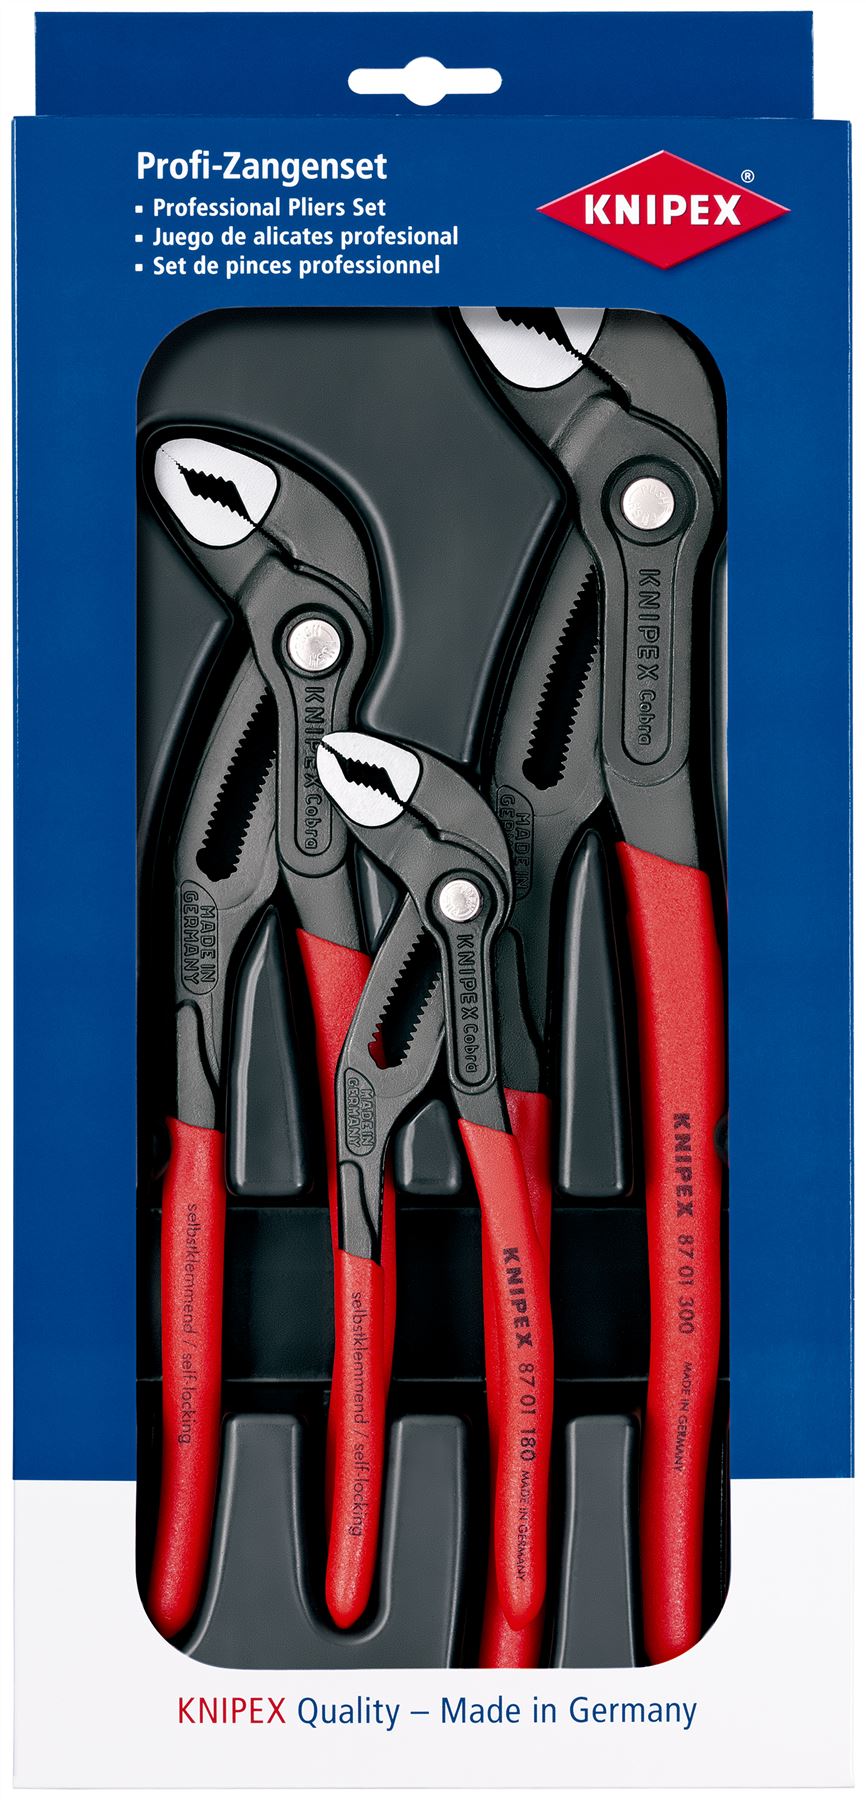 Knipex Cobra Pliers Set, 3 Pieces - 5, 10, and 12